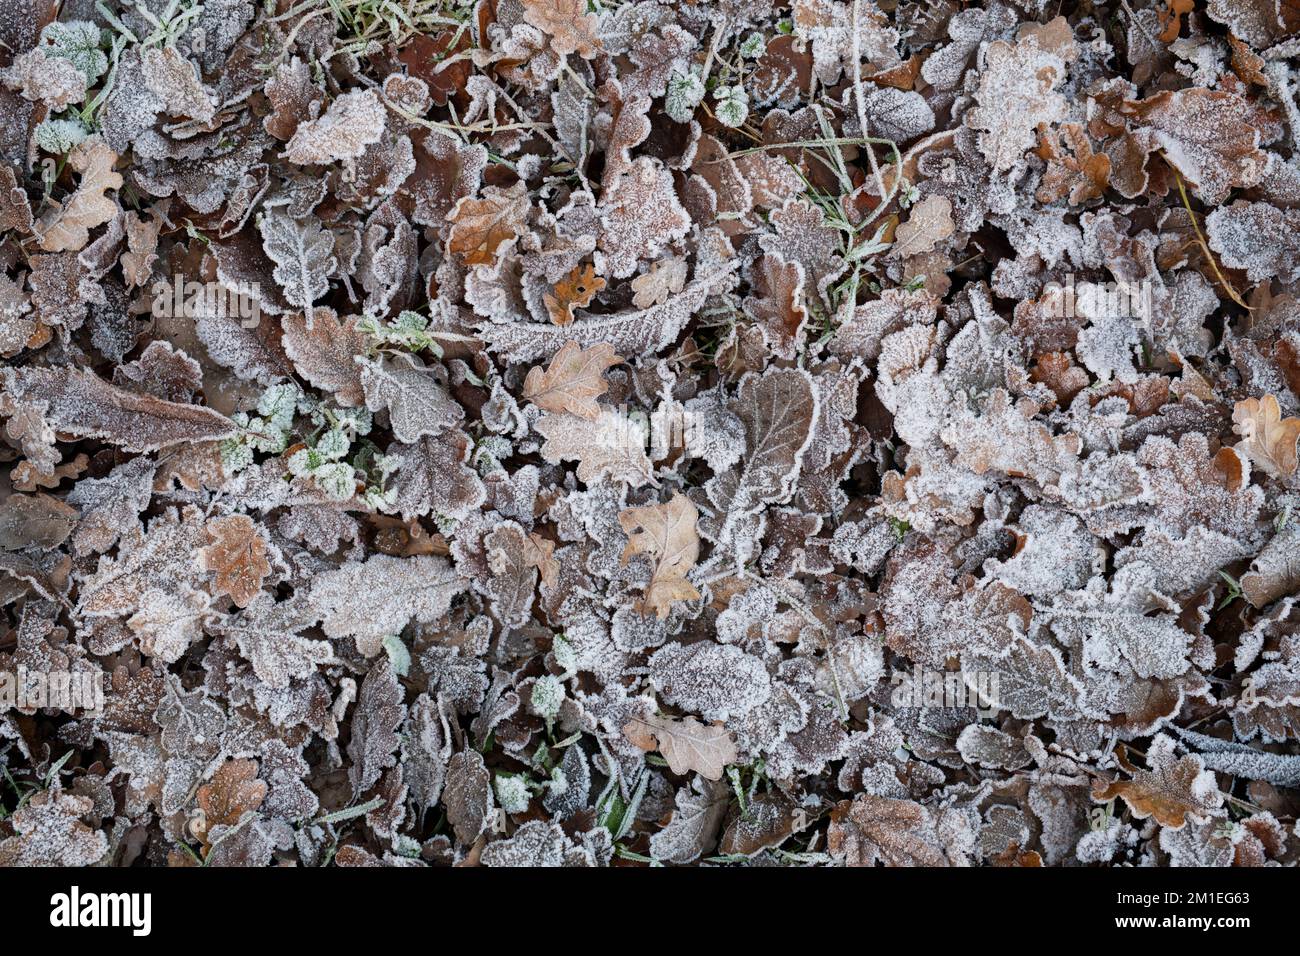 Frosty oak and sweet chesnut leaves on a woodland floor in winter. UK Stock Photo